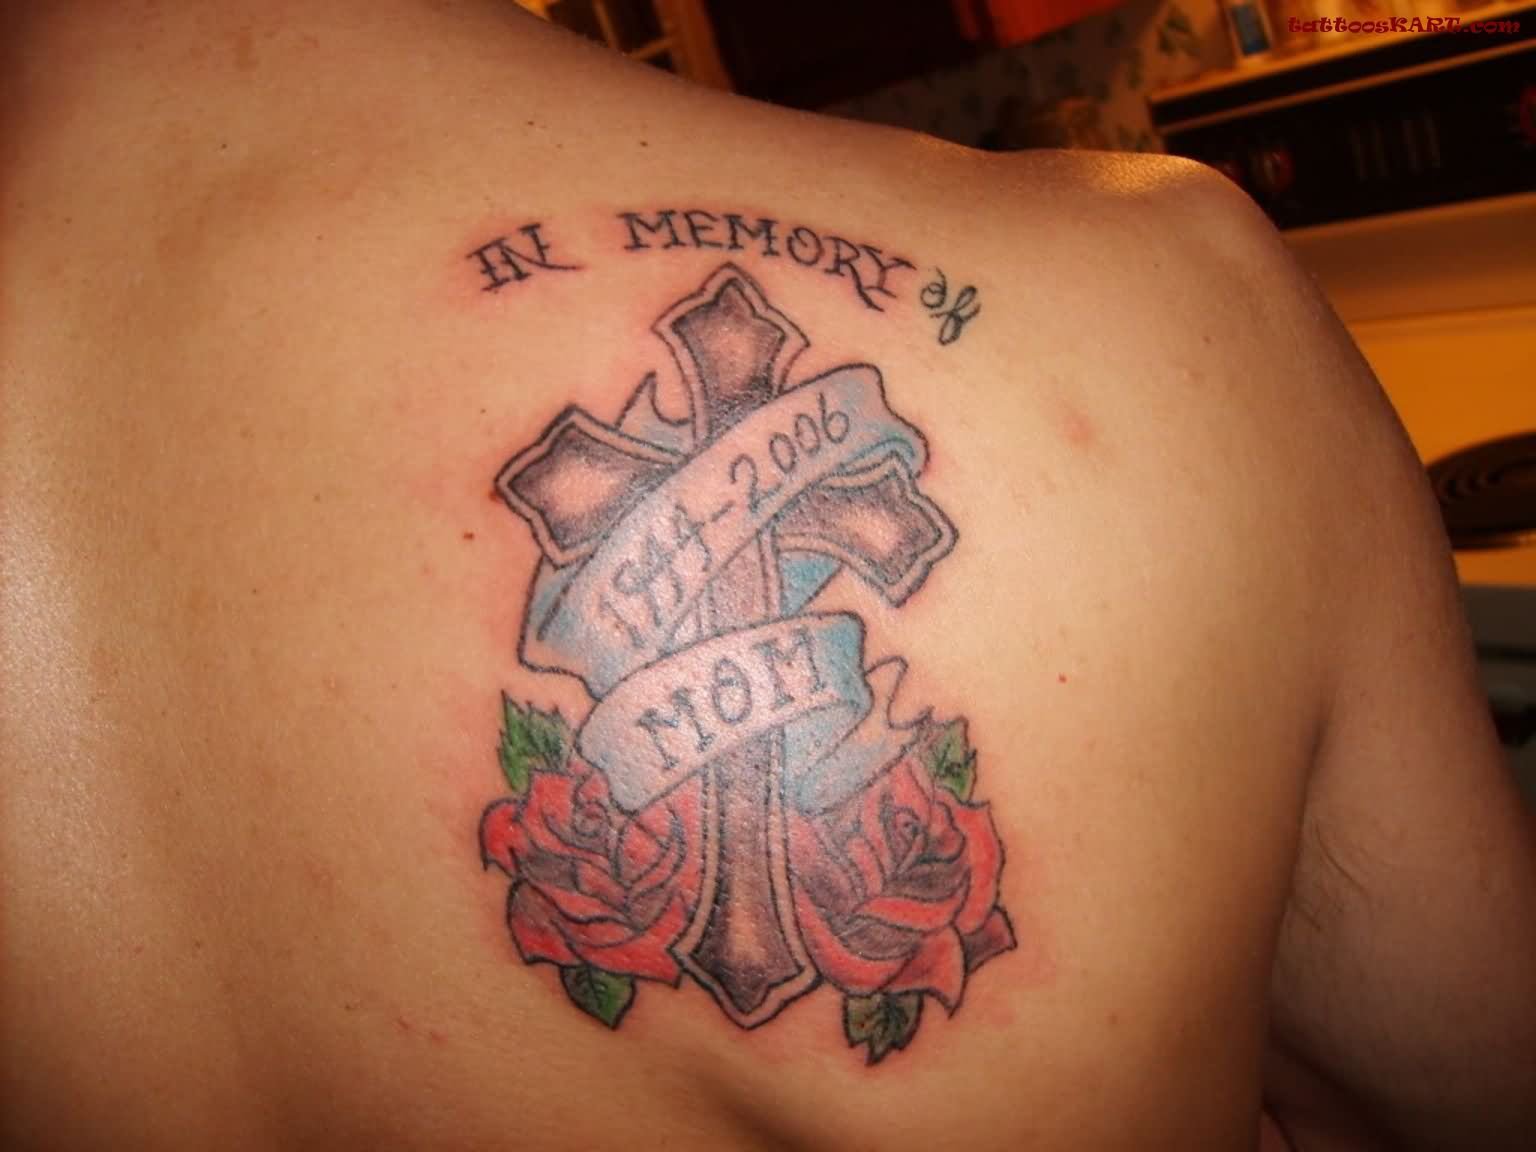 Memorial Cross With Roses And Mom Banner Tattoo On Right Back Shoulder